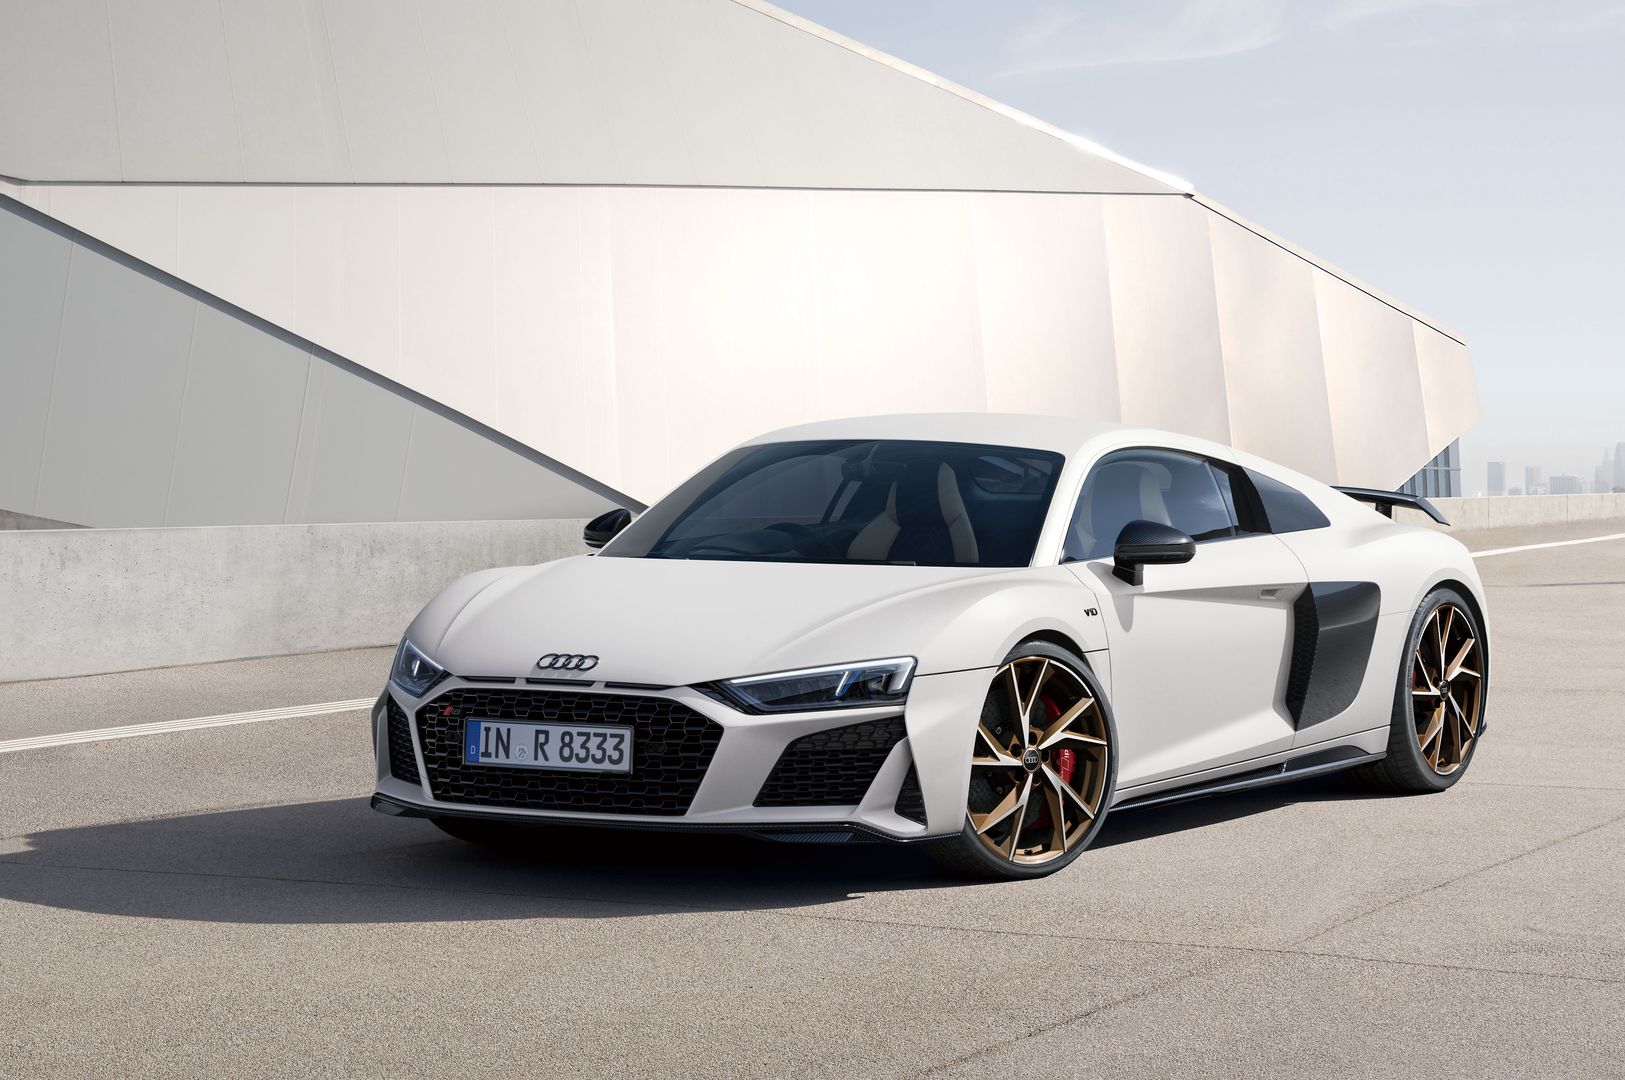 Audi R8 takes a final bow with an exclusive Japanese edition. Only